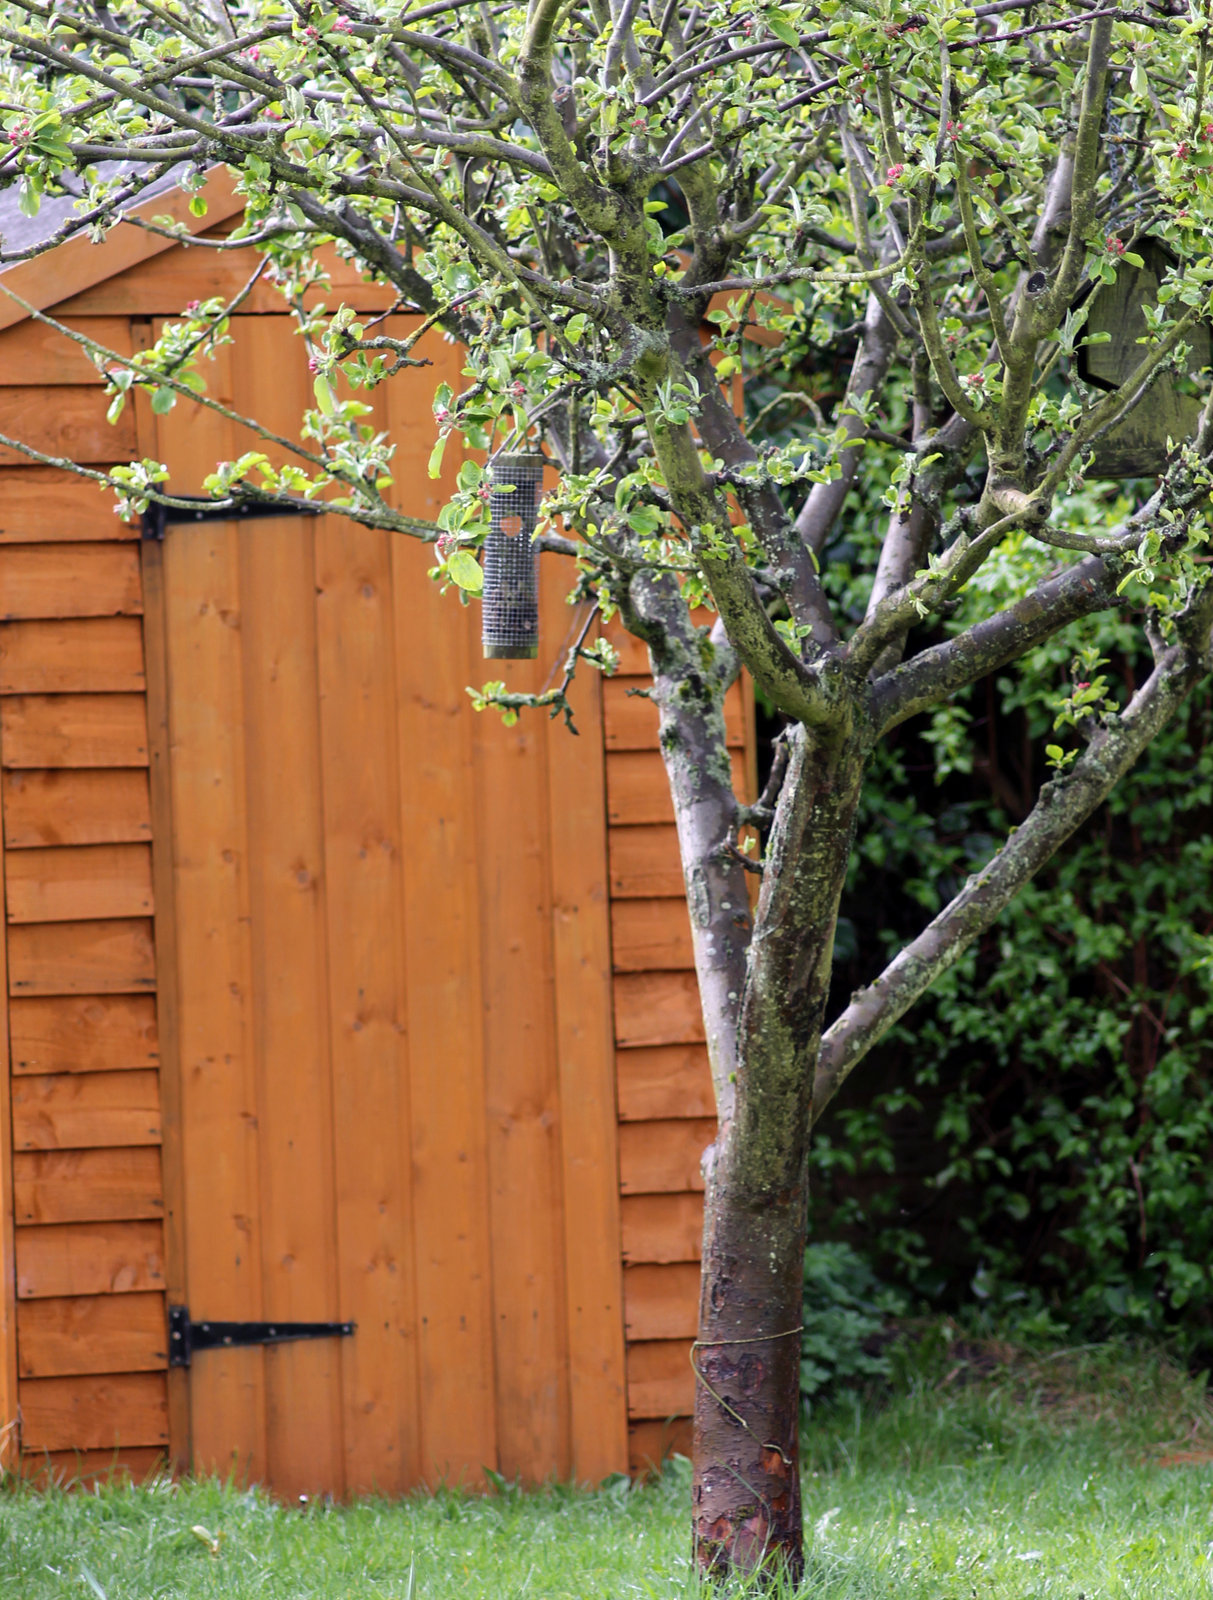 Expert Tips for Building the Perfect Garden Shed